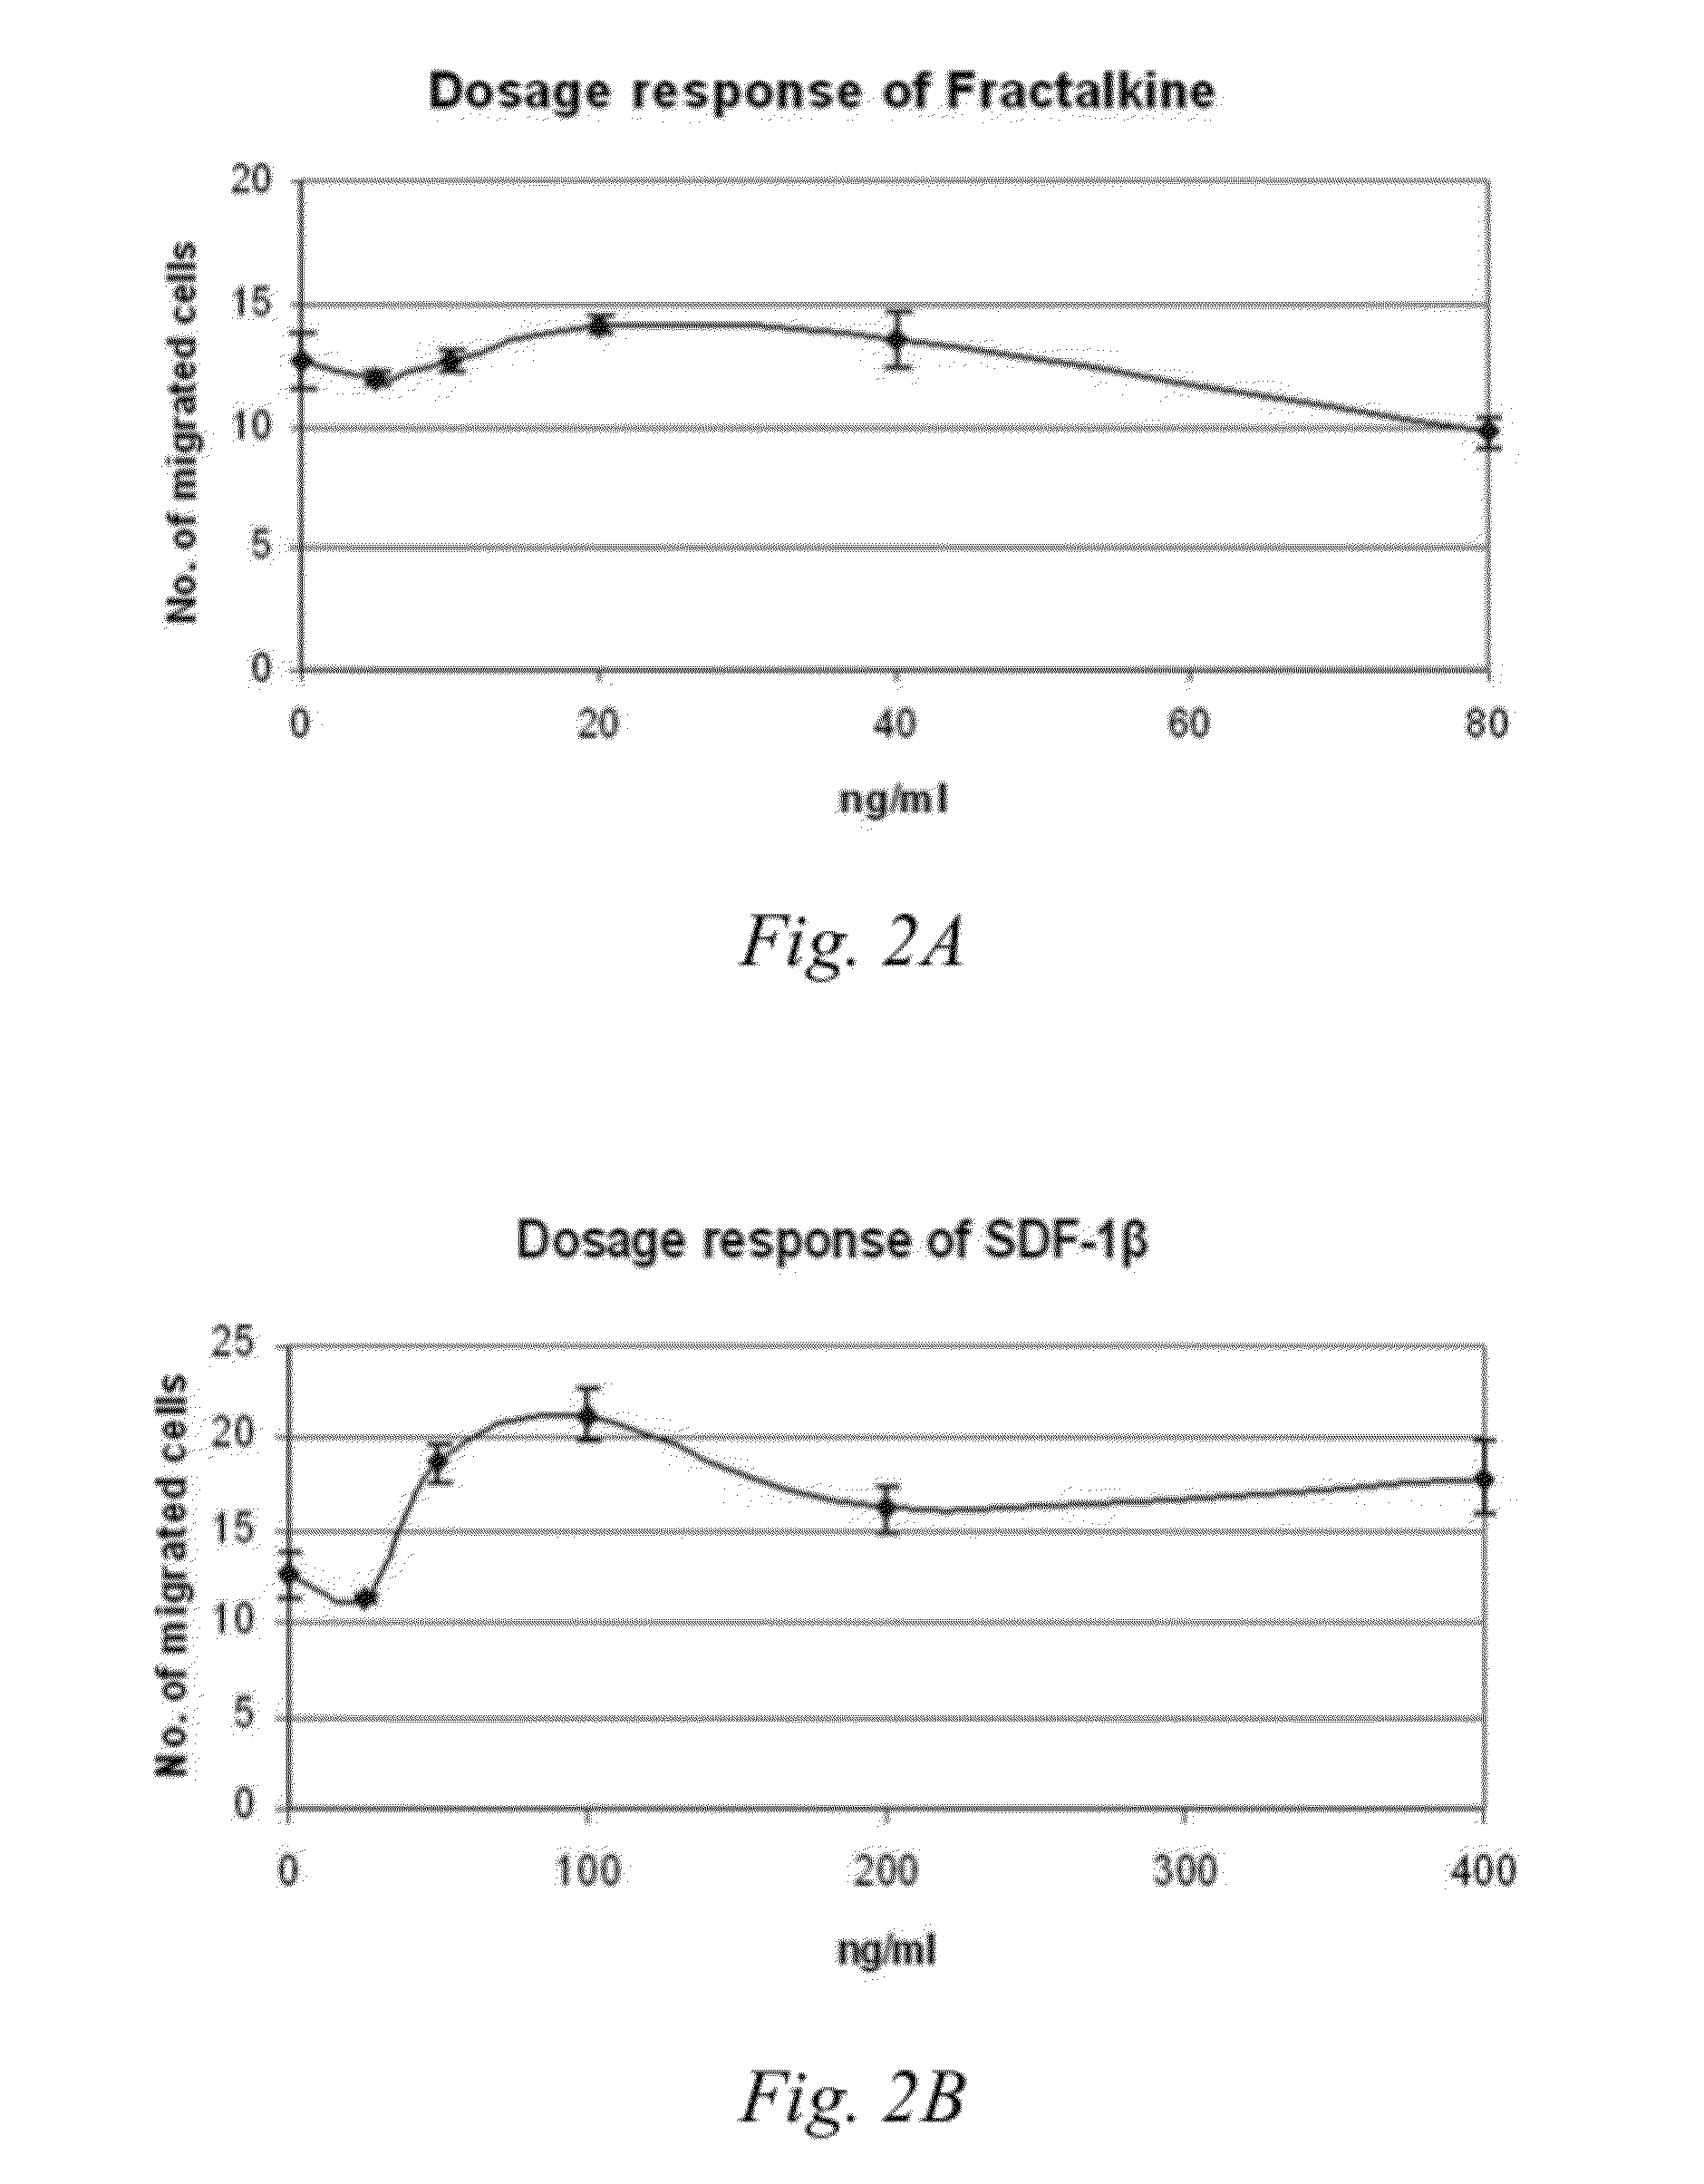 Methods to enhance cell migration and engraftment